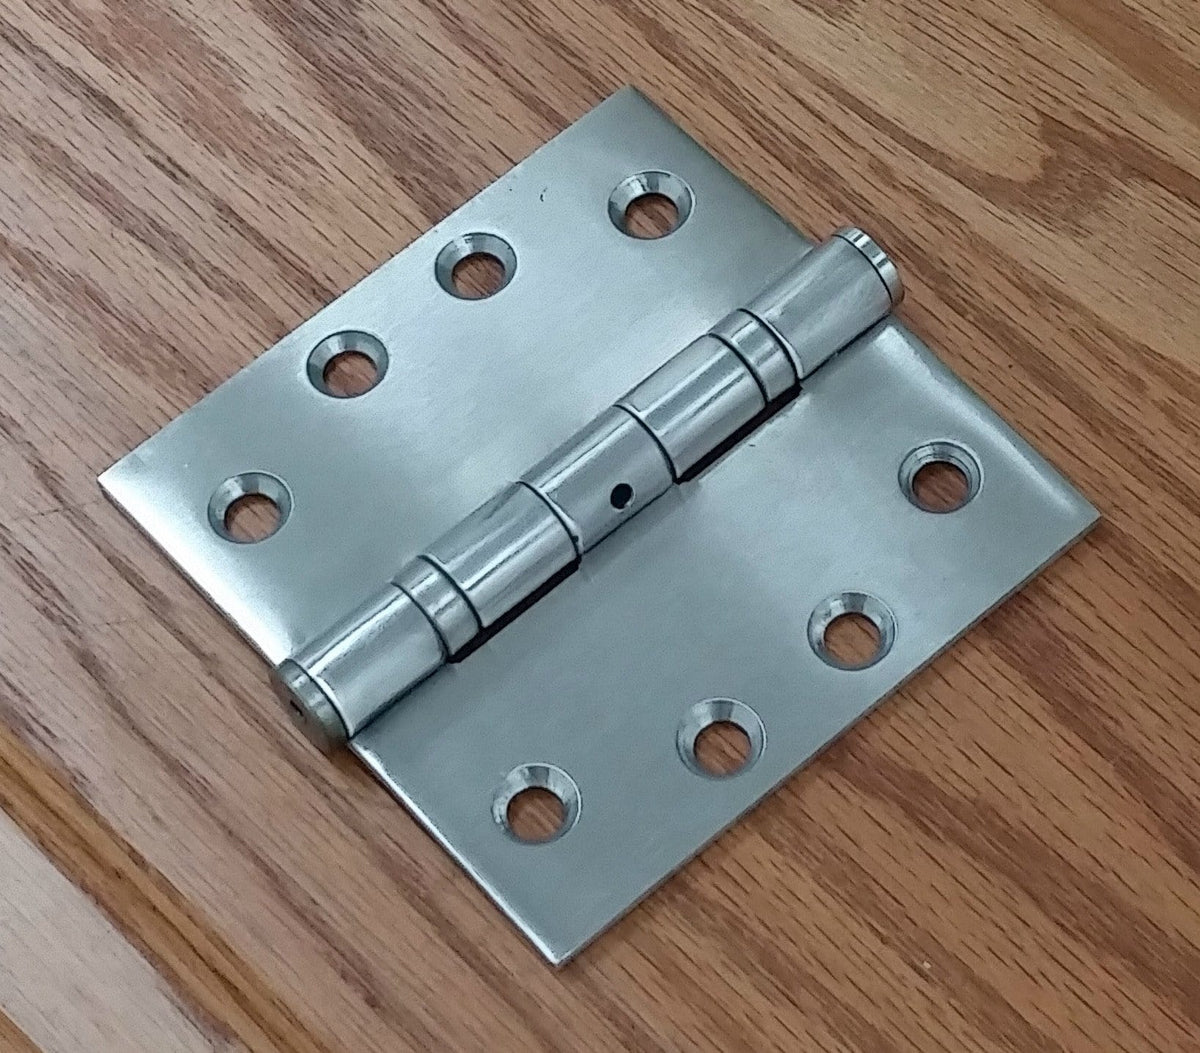 Commercial Ball Bearing Door Hinges - 4" Inches Square - Multiple Finishes - Sold In Pairs